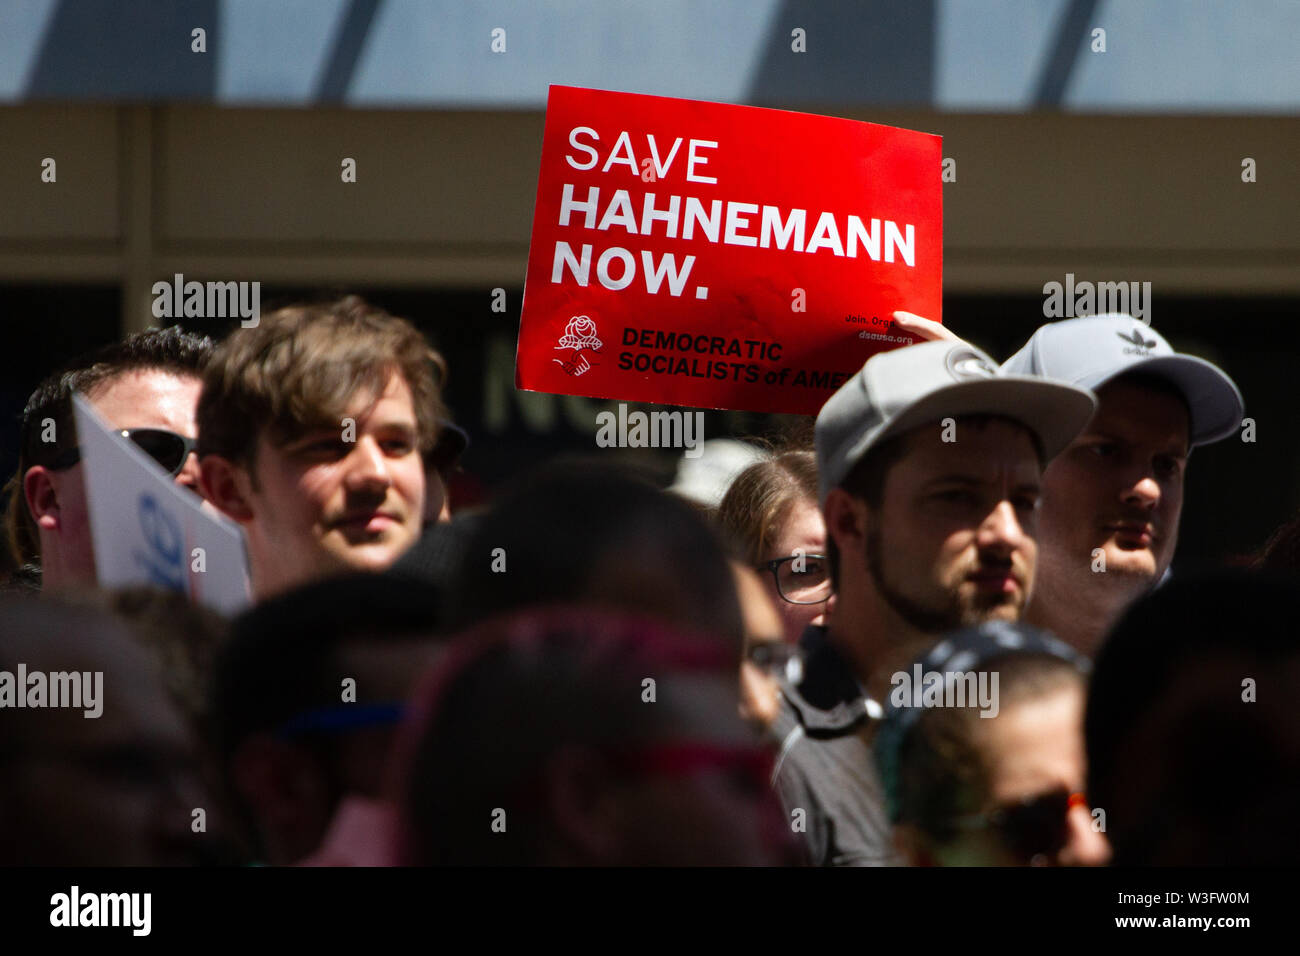 Philadelphia, Pennsylvania, USA. 15th July, 2019. July 15, 2019 - A crowd of hundreds gathers to protest the closure of Hahnemann University Hospital in Philadelphia, PA, July 15, 2019. Hahnemann, a busy urban healthcare center, is facing imminent closure after being acquired by a hedge fund that is looking to raze the building and turn the land into rental or retail properties. (Credit Image: © Michael CandeloriZUMA Wire) Credit: ZUMA Press, Inc./Alamy Live News Stock Photo